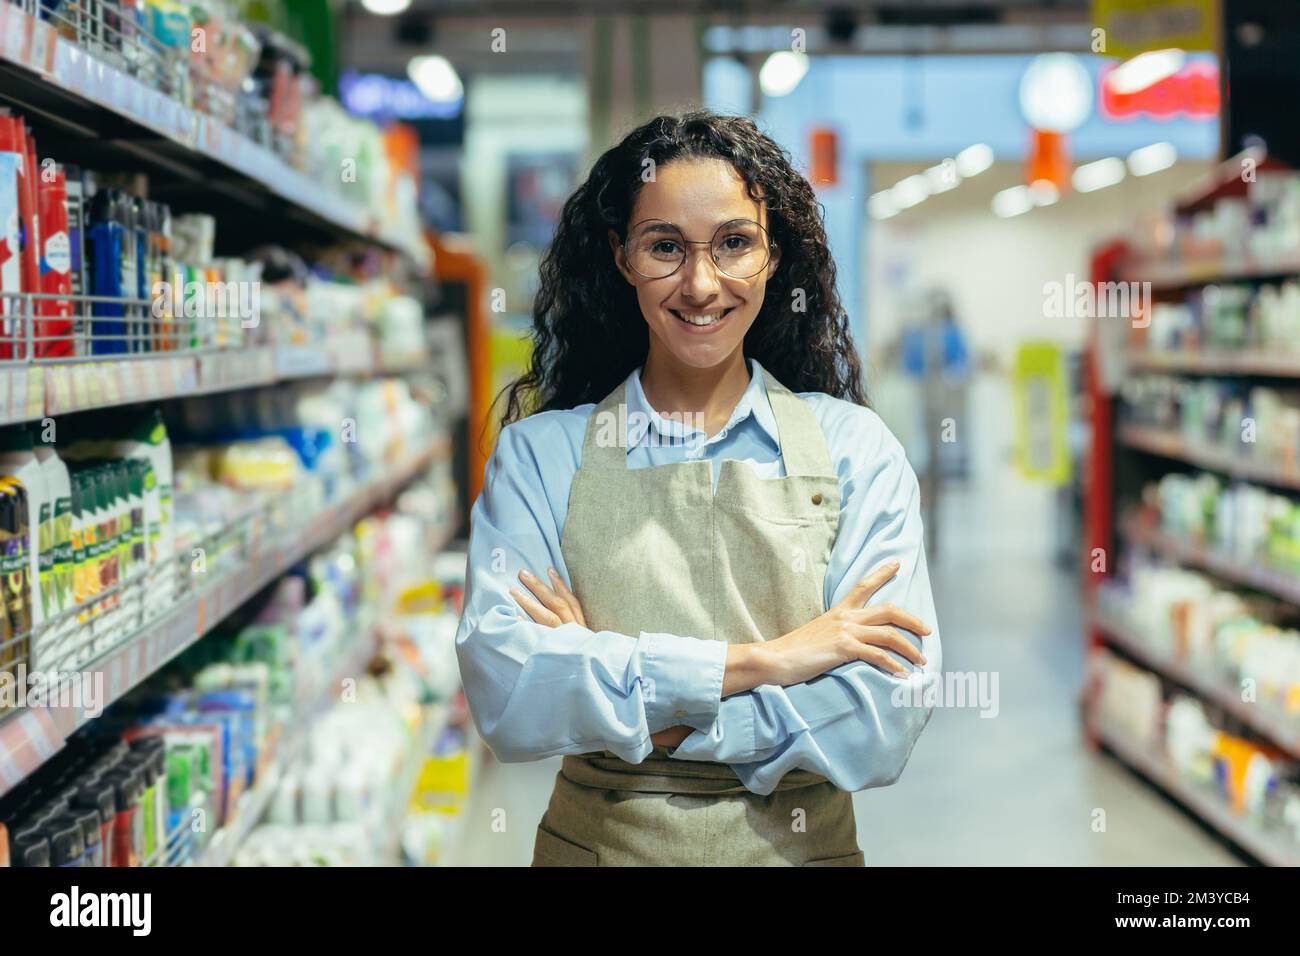 Portrait of Hispanic woman seller in supermarket, female worker in apron with curly hair and glasses smiling and looking at camera, saleswoman among goods with household chemicals and shelves. Stock Photo